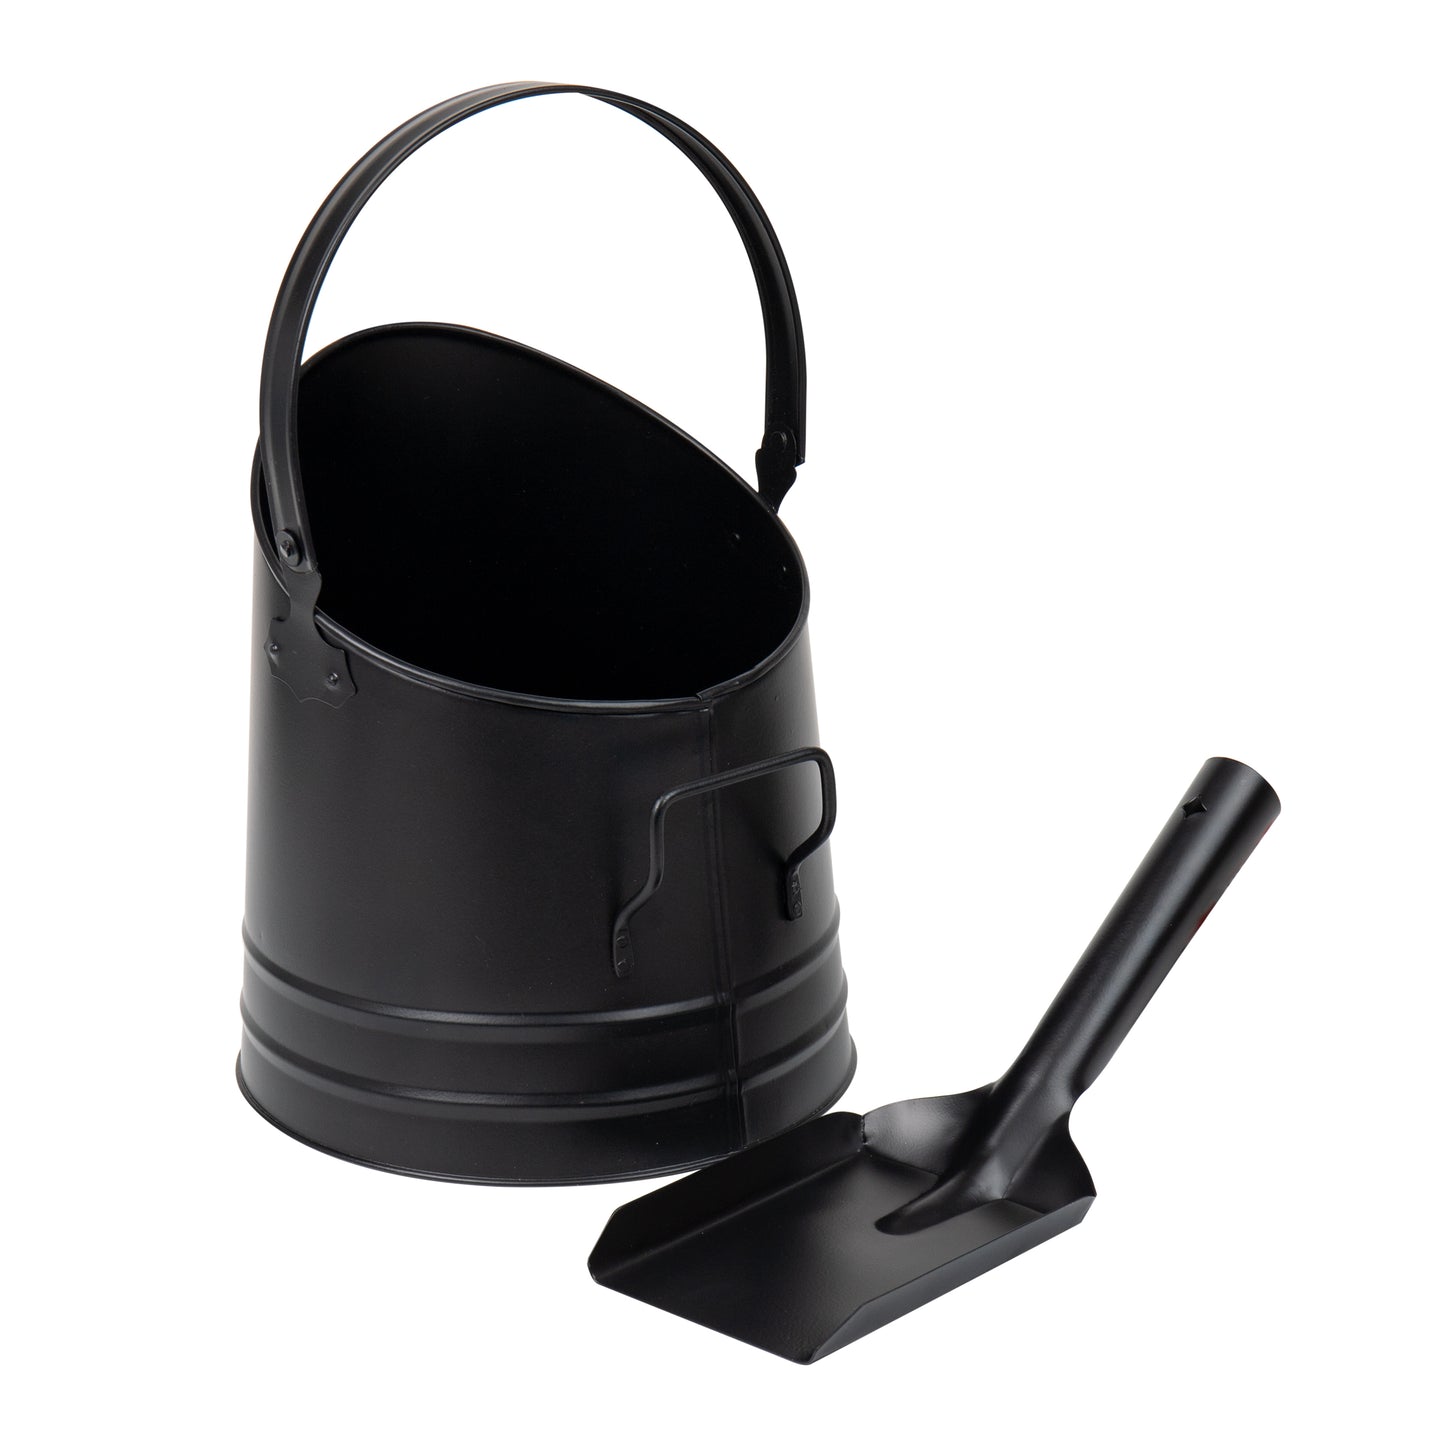 Mind Reader Fireplace Ash Bucket and Shovel, Wood Stove, Fireplace Accessories, Metal, 10"L x 10"W x 11.25"H, 2 pcs, Black